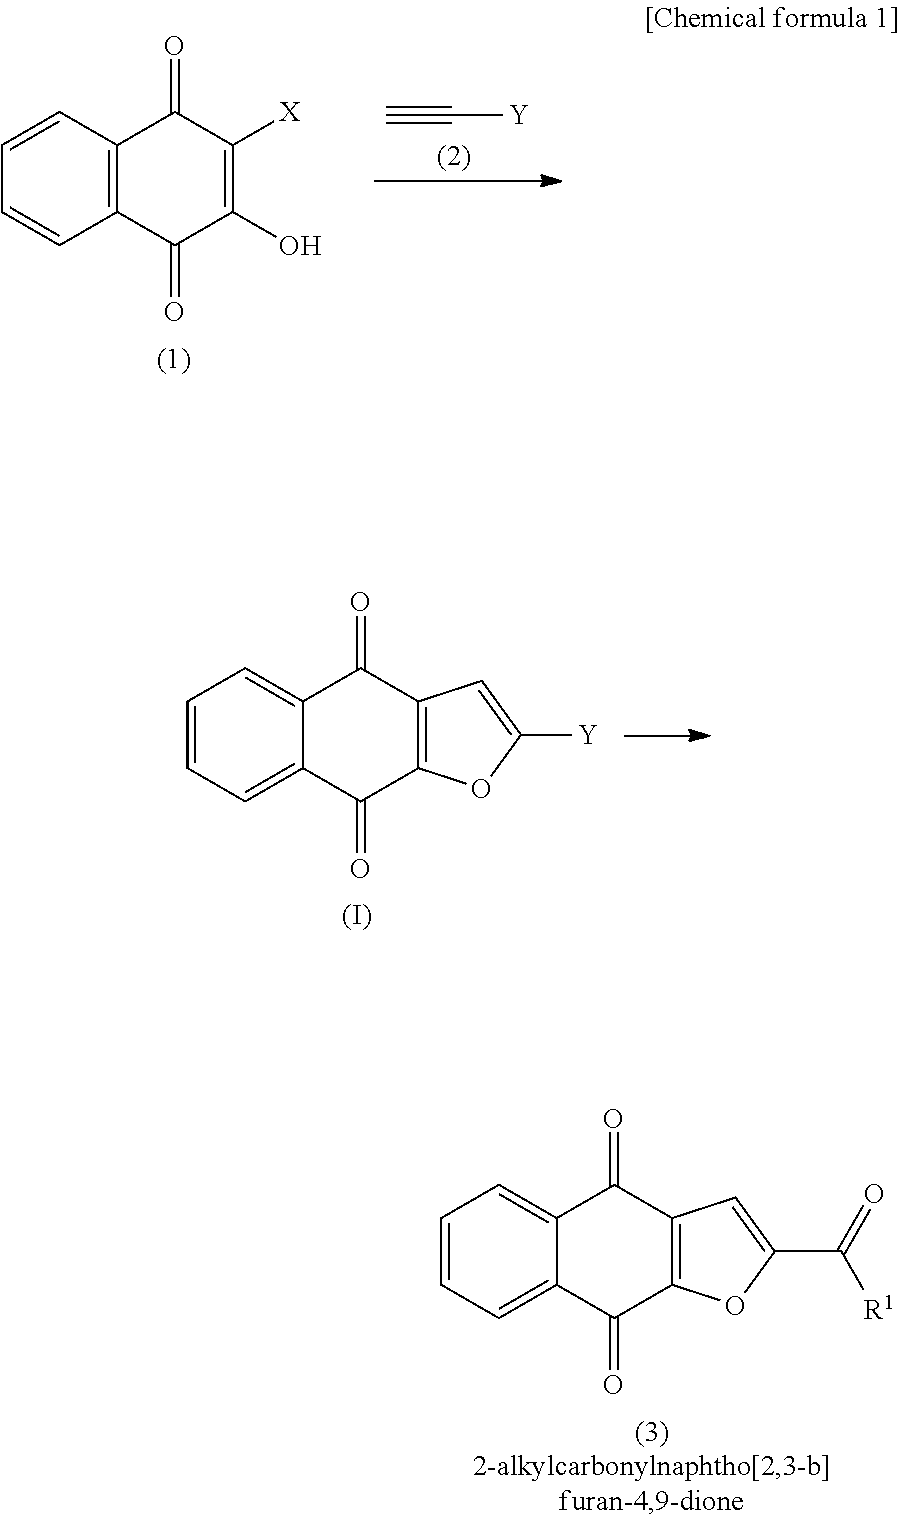 METHOD FOR PRODUCING 2-ALKYLCARBONYLNAPHTHO[2,3-b]FURAN-4,9-DIONE-RELATED SUBSTANCE, AND SAID RELATED SUBSTANCE